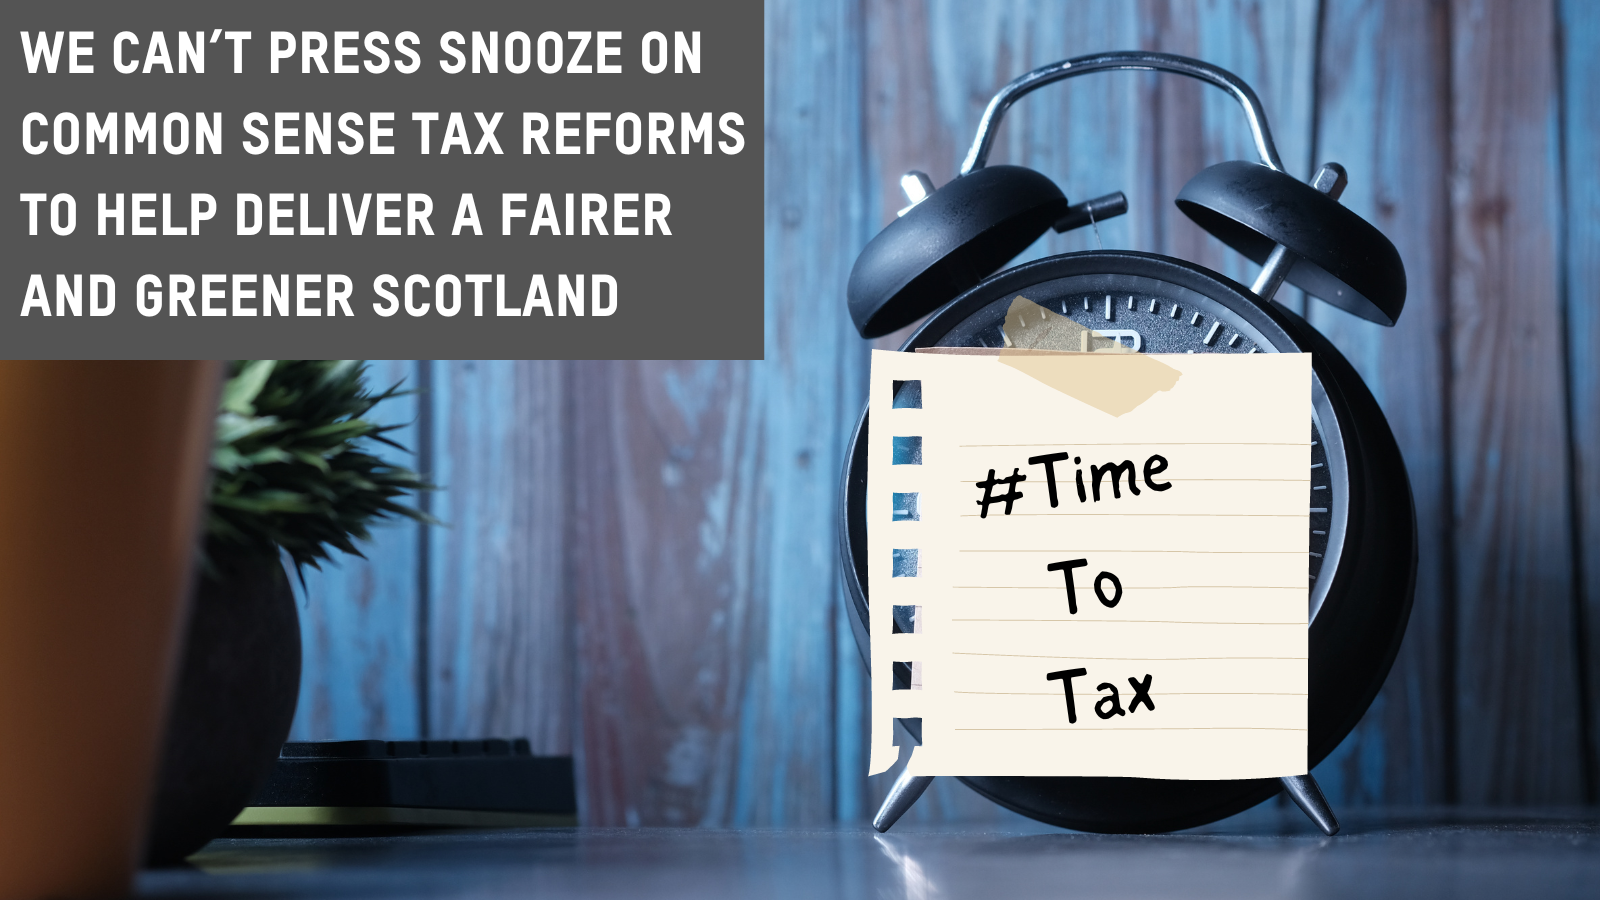 Alarm clock with post it note reading Time to Tax. Banner saying we can't press snooze on common sense tax reforms to build a fairer greener Scotland